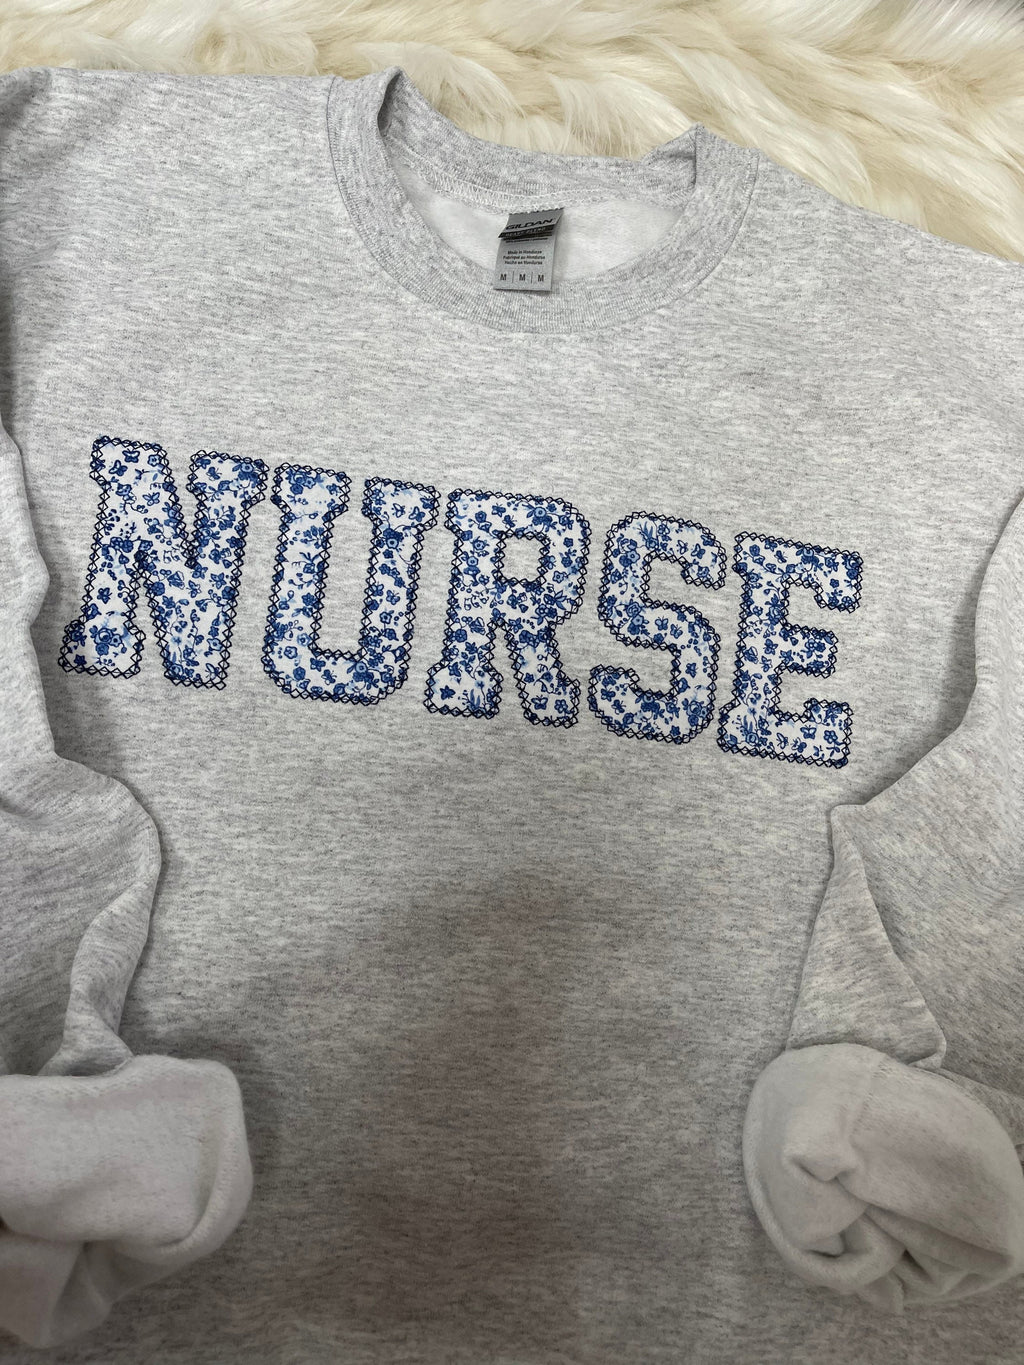 Nurse Embroidered Blue Floral Applique Sweatshirt  | Simple Doctor Pullover, Gift for Medical Field, Personalized RN Shirt